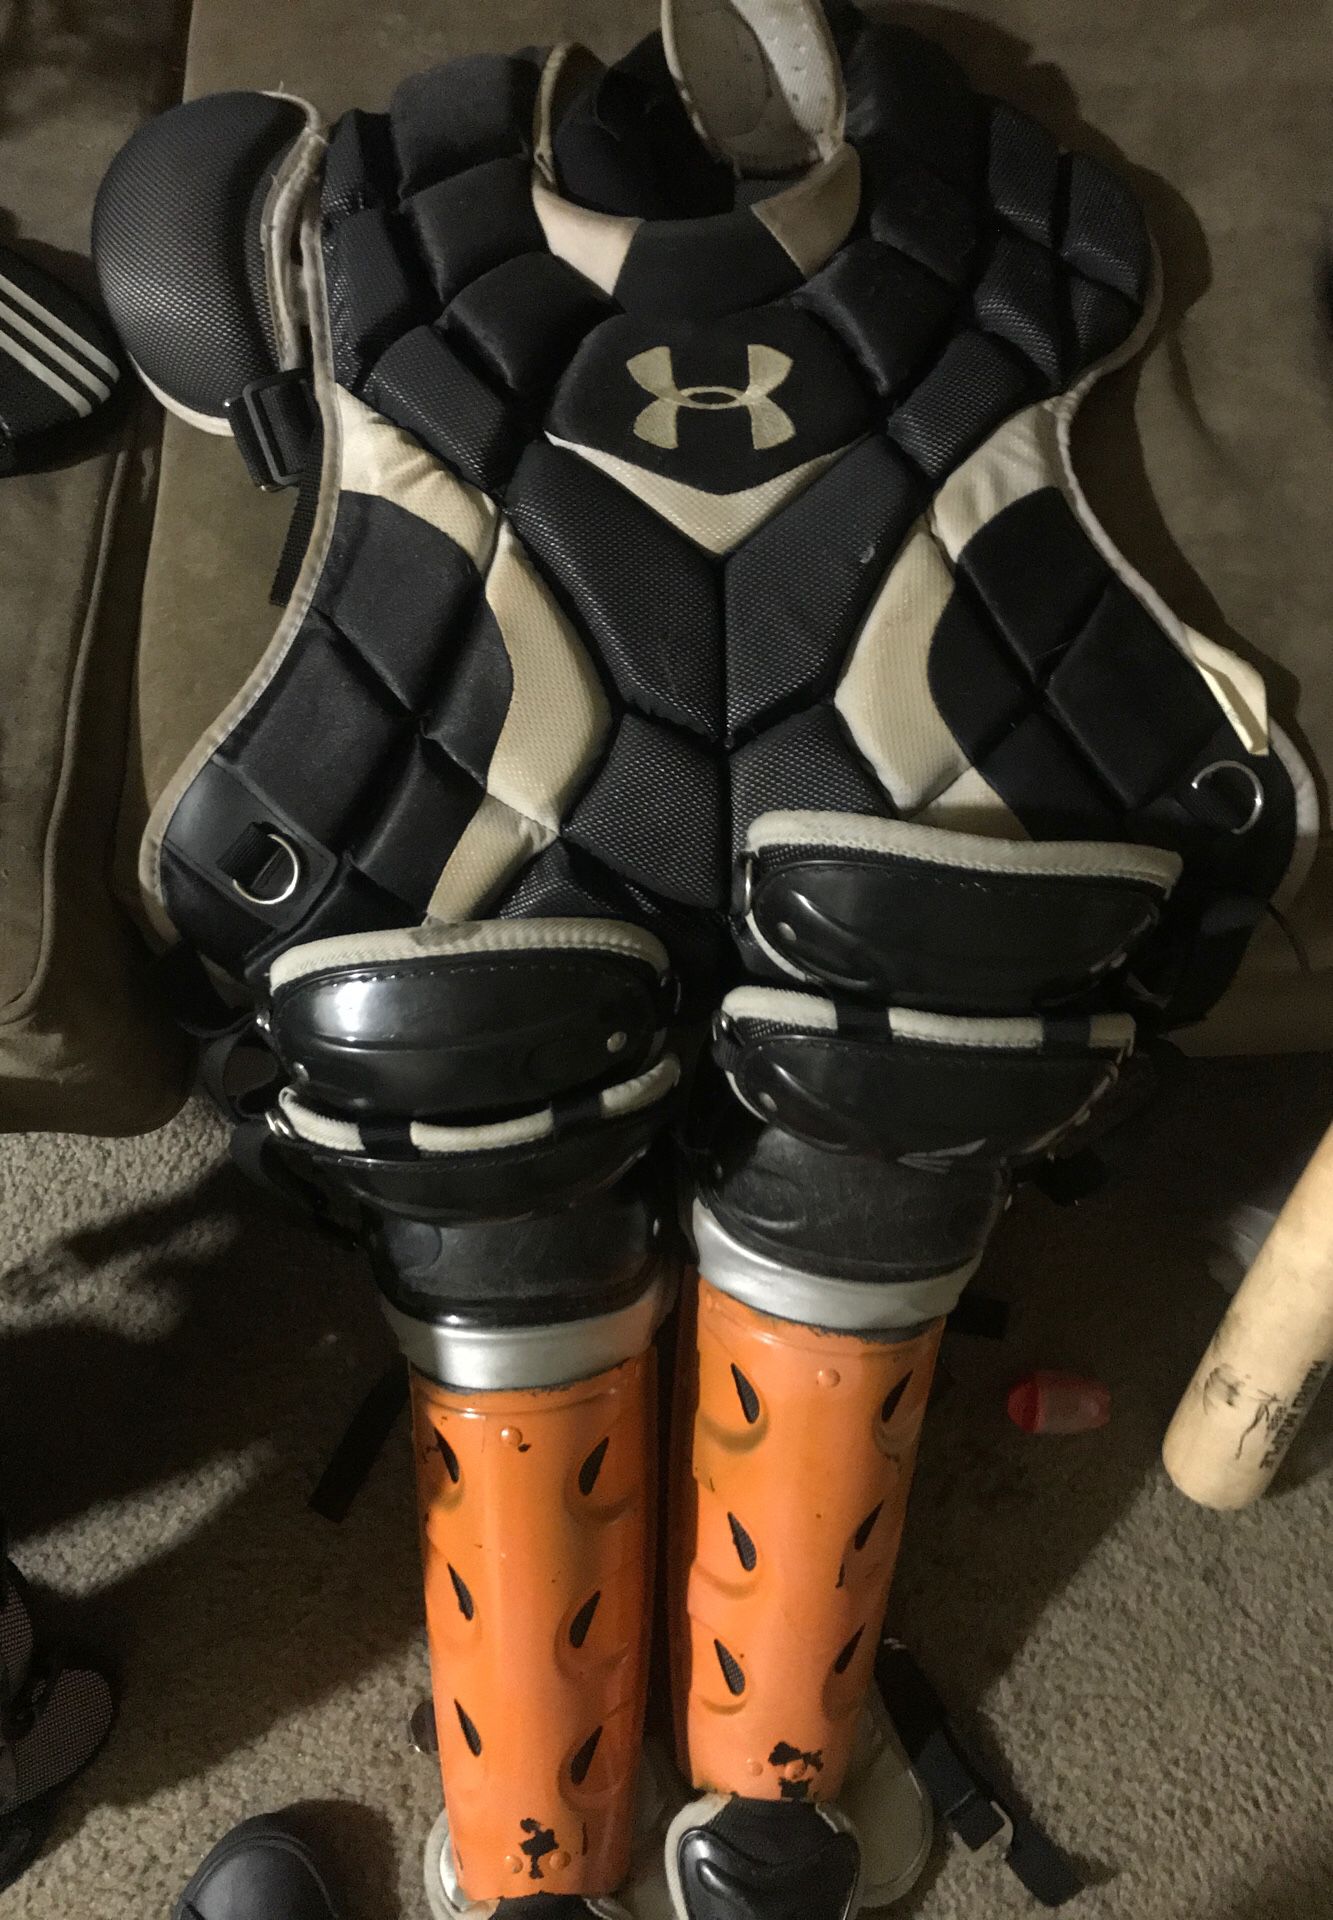 Under Armor Chest Protector and Easton Shin Guards